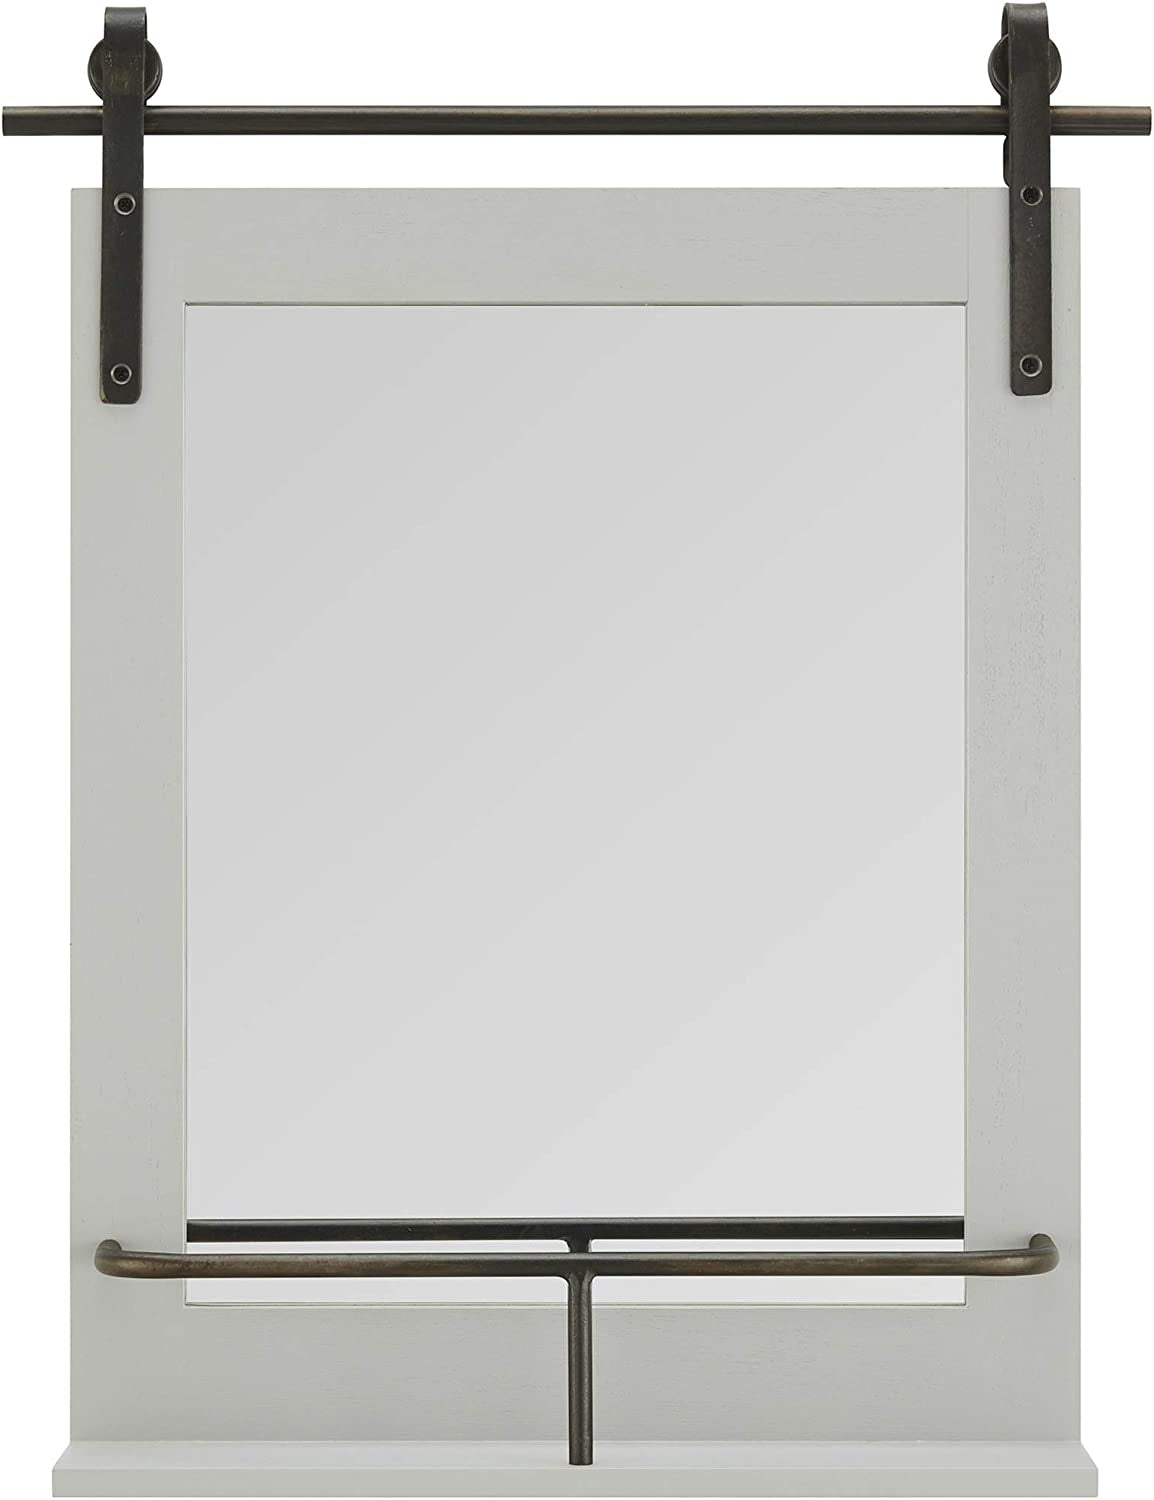 Firstime & Co. Gray Ingram Barn Door Wall Mirror with Shelf, Vintage Decor for Bedroom and Bathroom Vanity, Wood, Farmhouse, 24.75 X 19.75 Inches